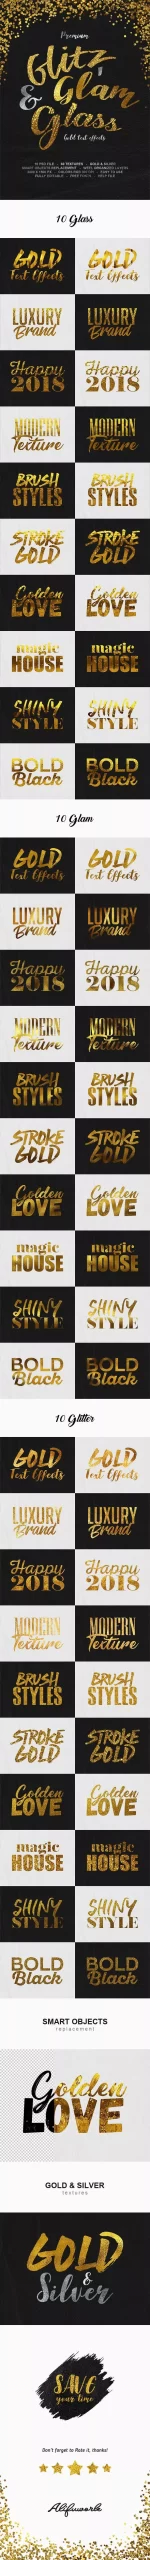 Glitz, Glam & Glass Gold Text Effects free download